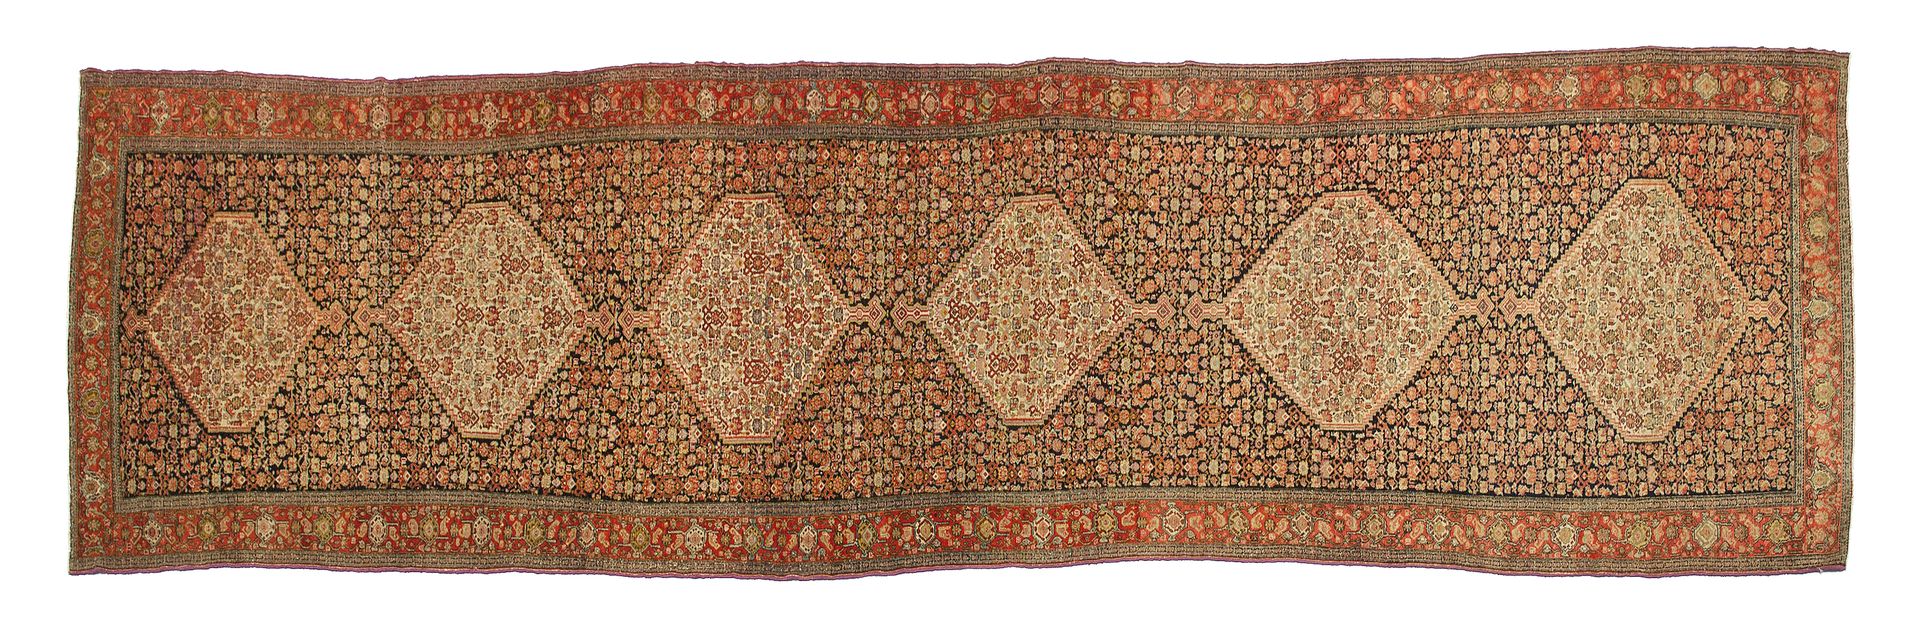 Null Important and fine SENNEH gallery carpet (Persia), end of the 19th century
&hellip;